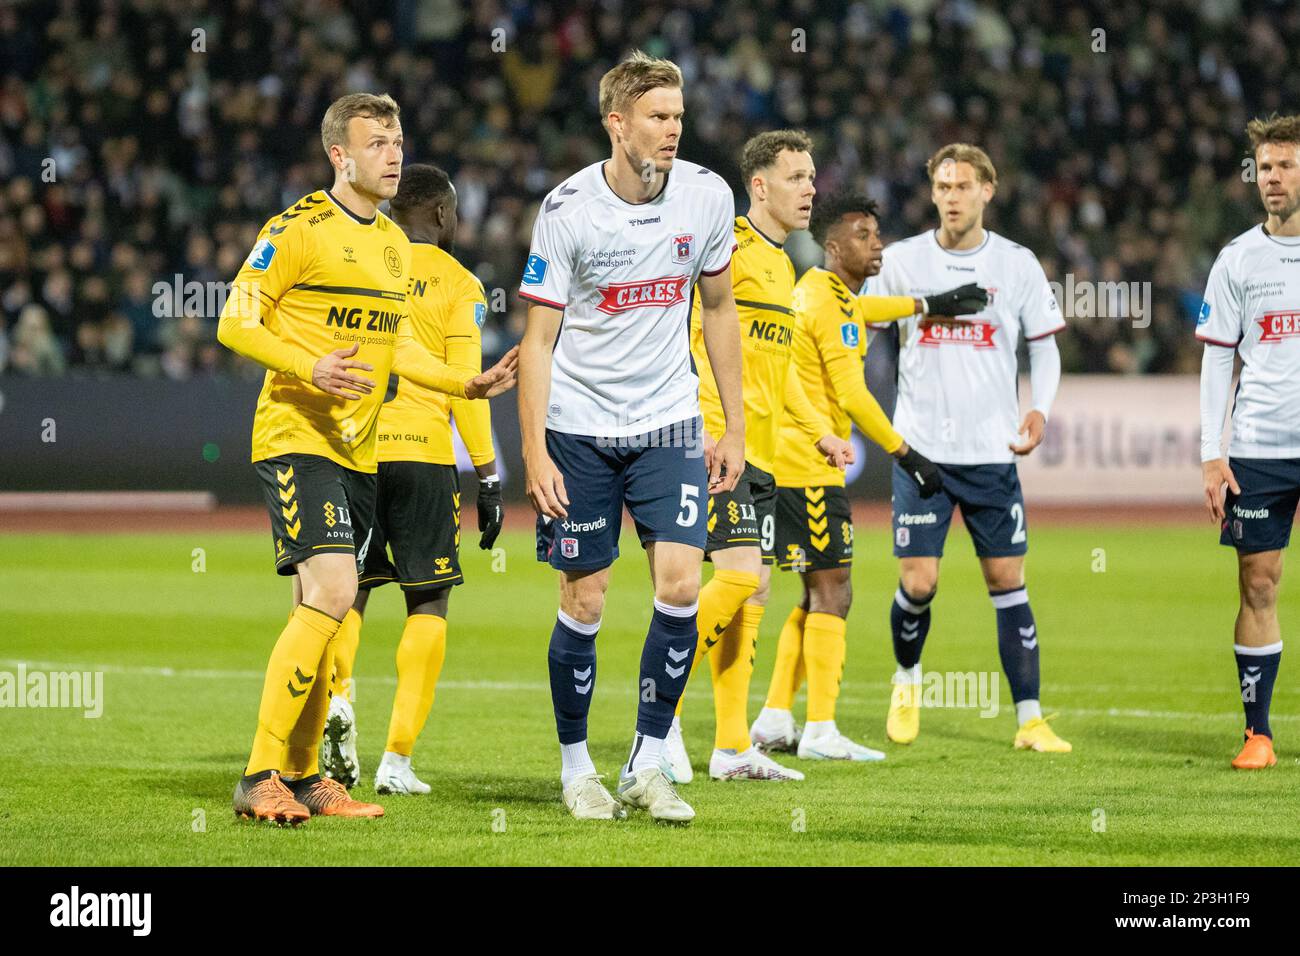 Aarhus, Denmark. 03rd, March 2023. Frederik Tingager of AGF and Malte Kiilerich Hansen (4) of AC Horsens seen during the 3F Superliga match between Aarhus and AC Horsens at Ceres